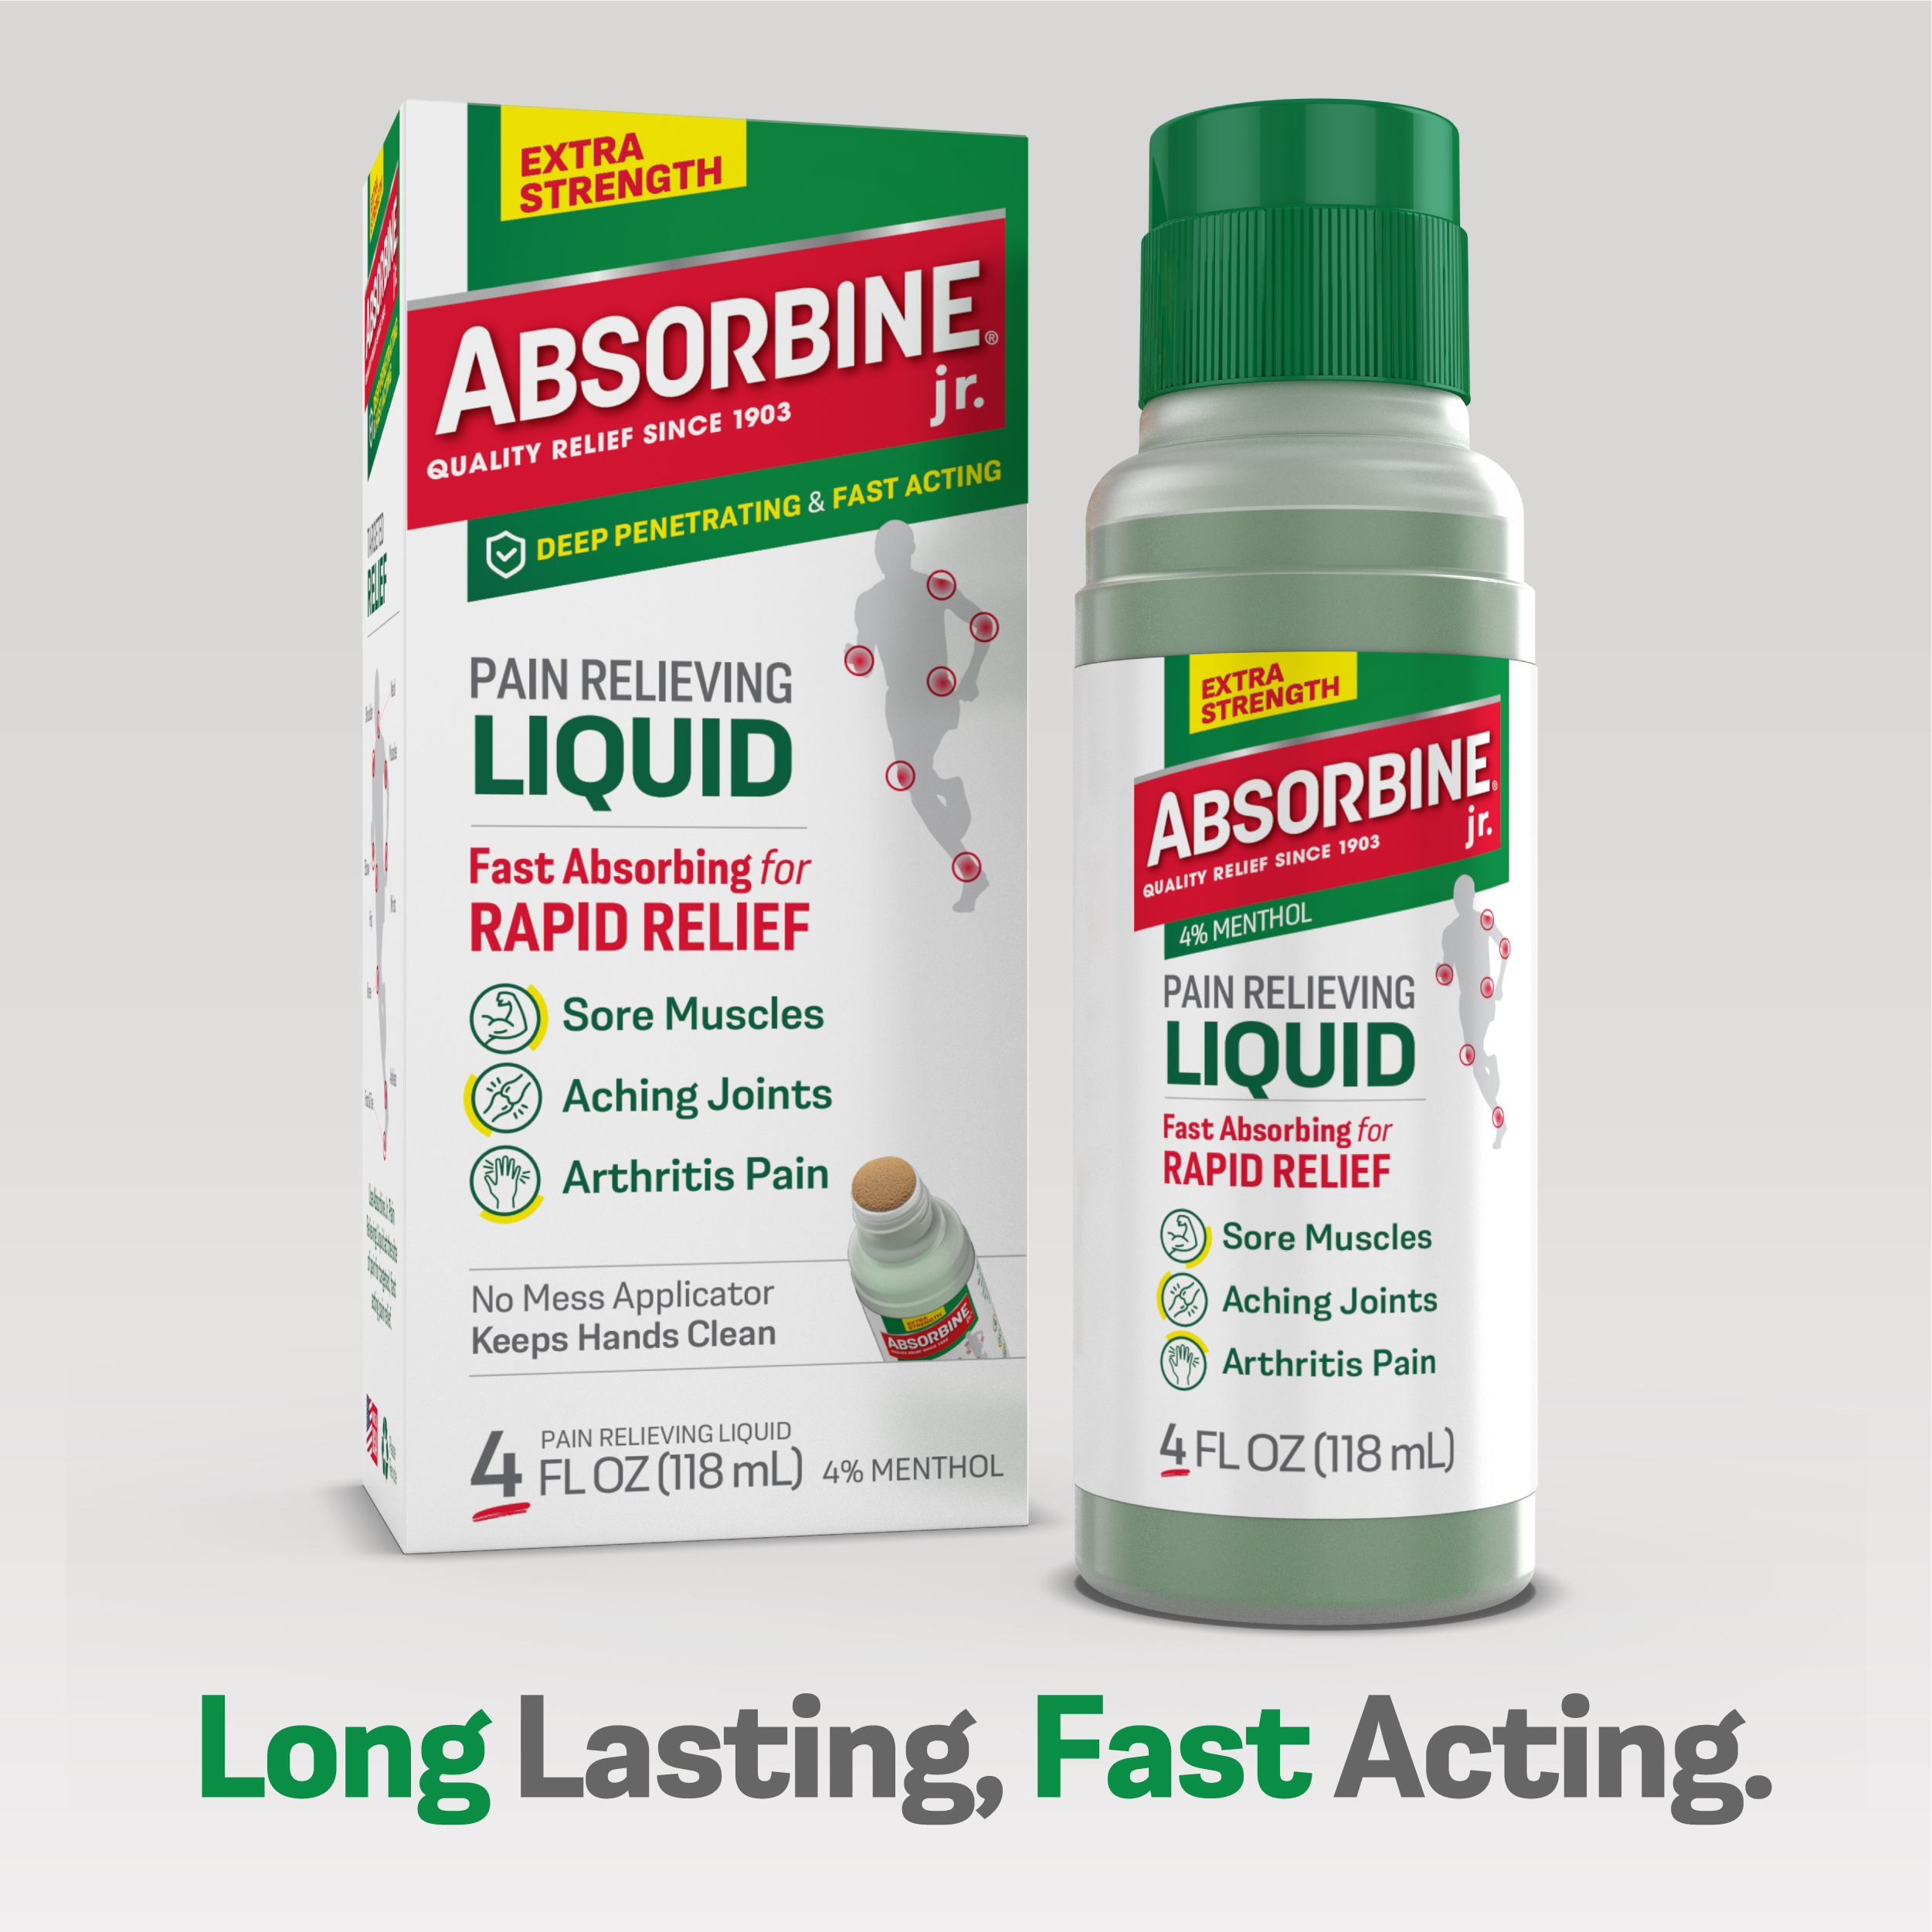 Absorbine Jr. Pain Relieving Liquid with Menthol for Sore Muscles, Joint Aches and Arthritis Pain Relief, 4oz - image 4 of 8